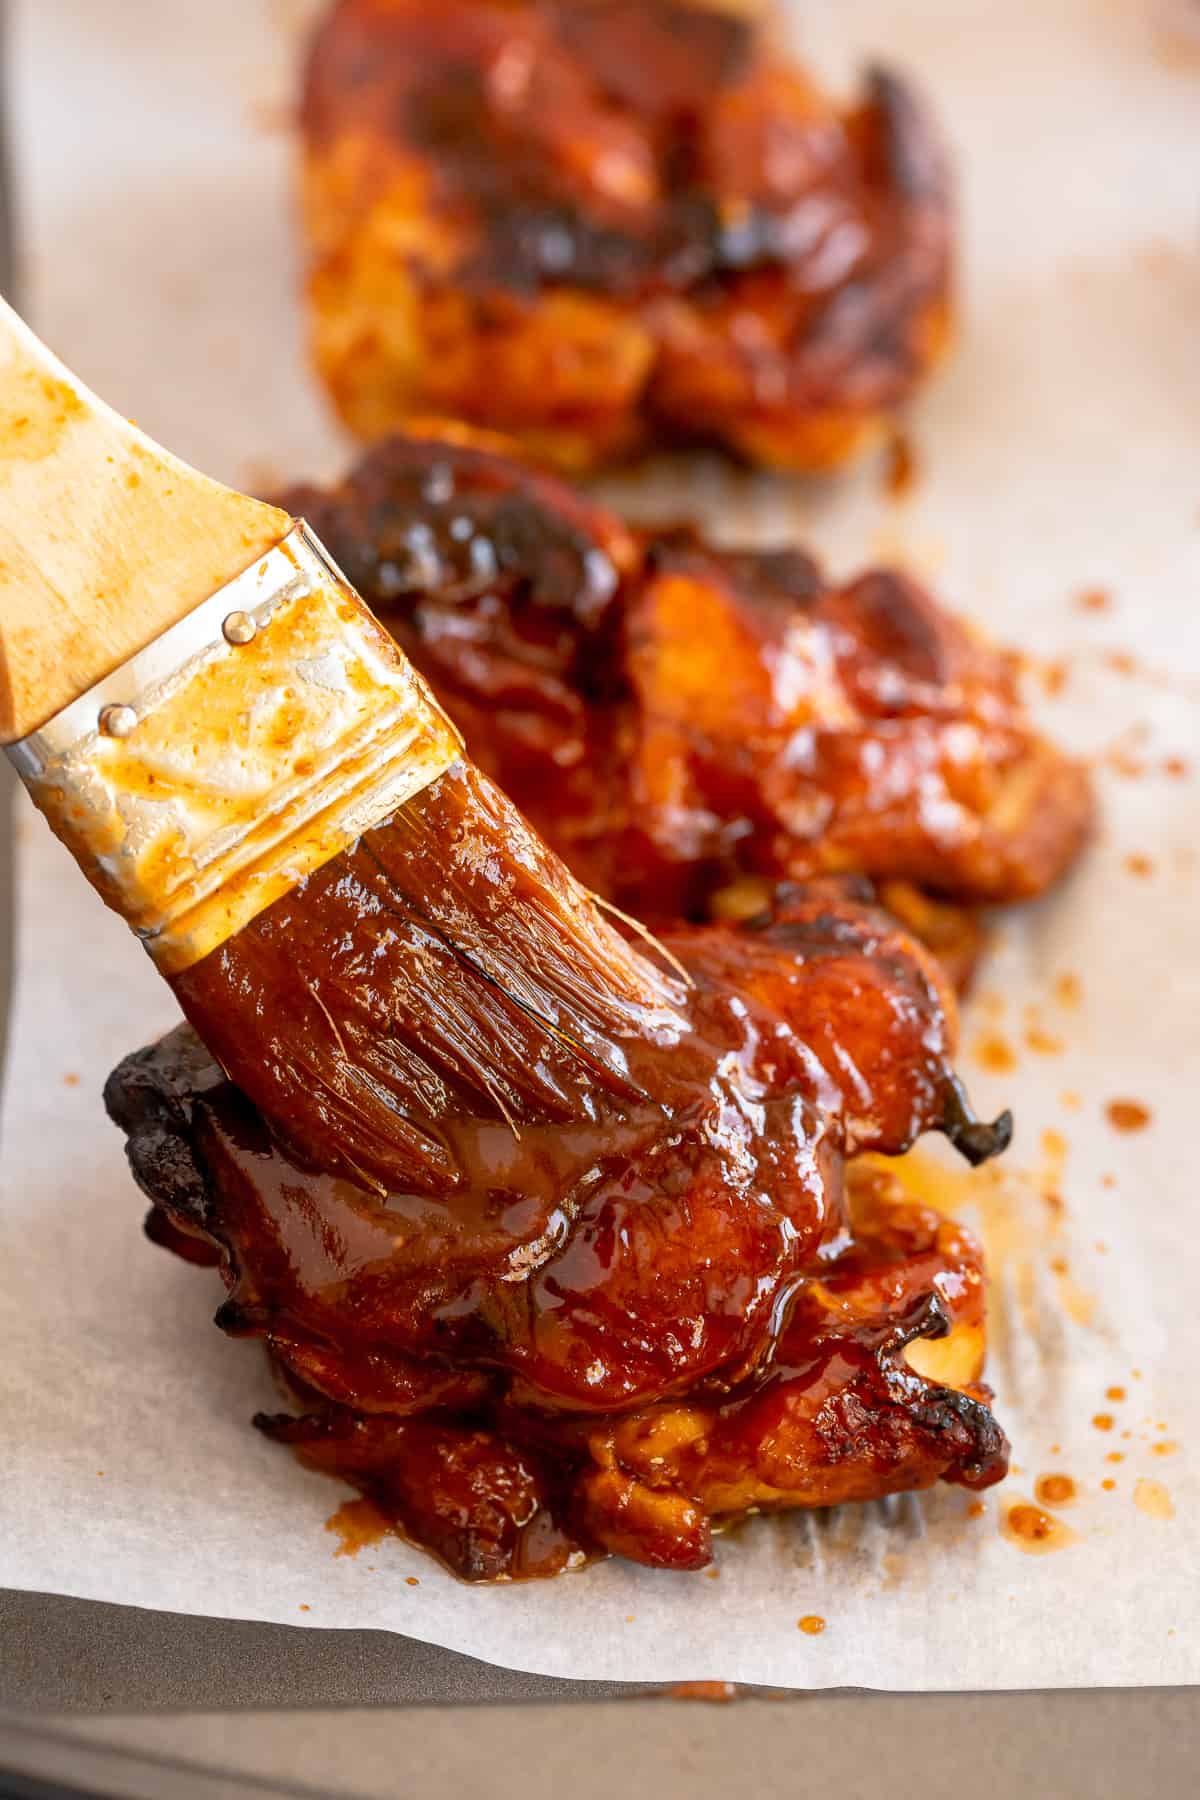 A pastry brush bastes grilled chicken with BBQ sauce.